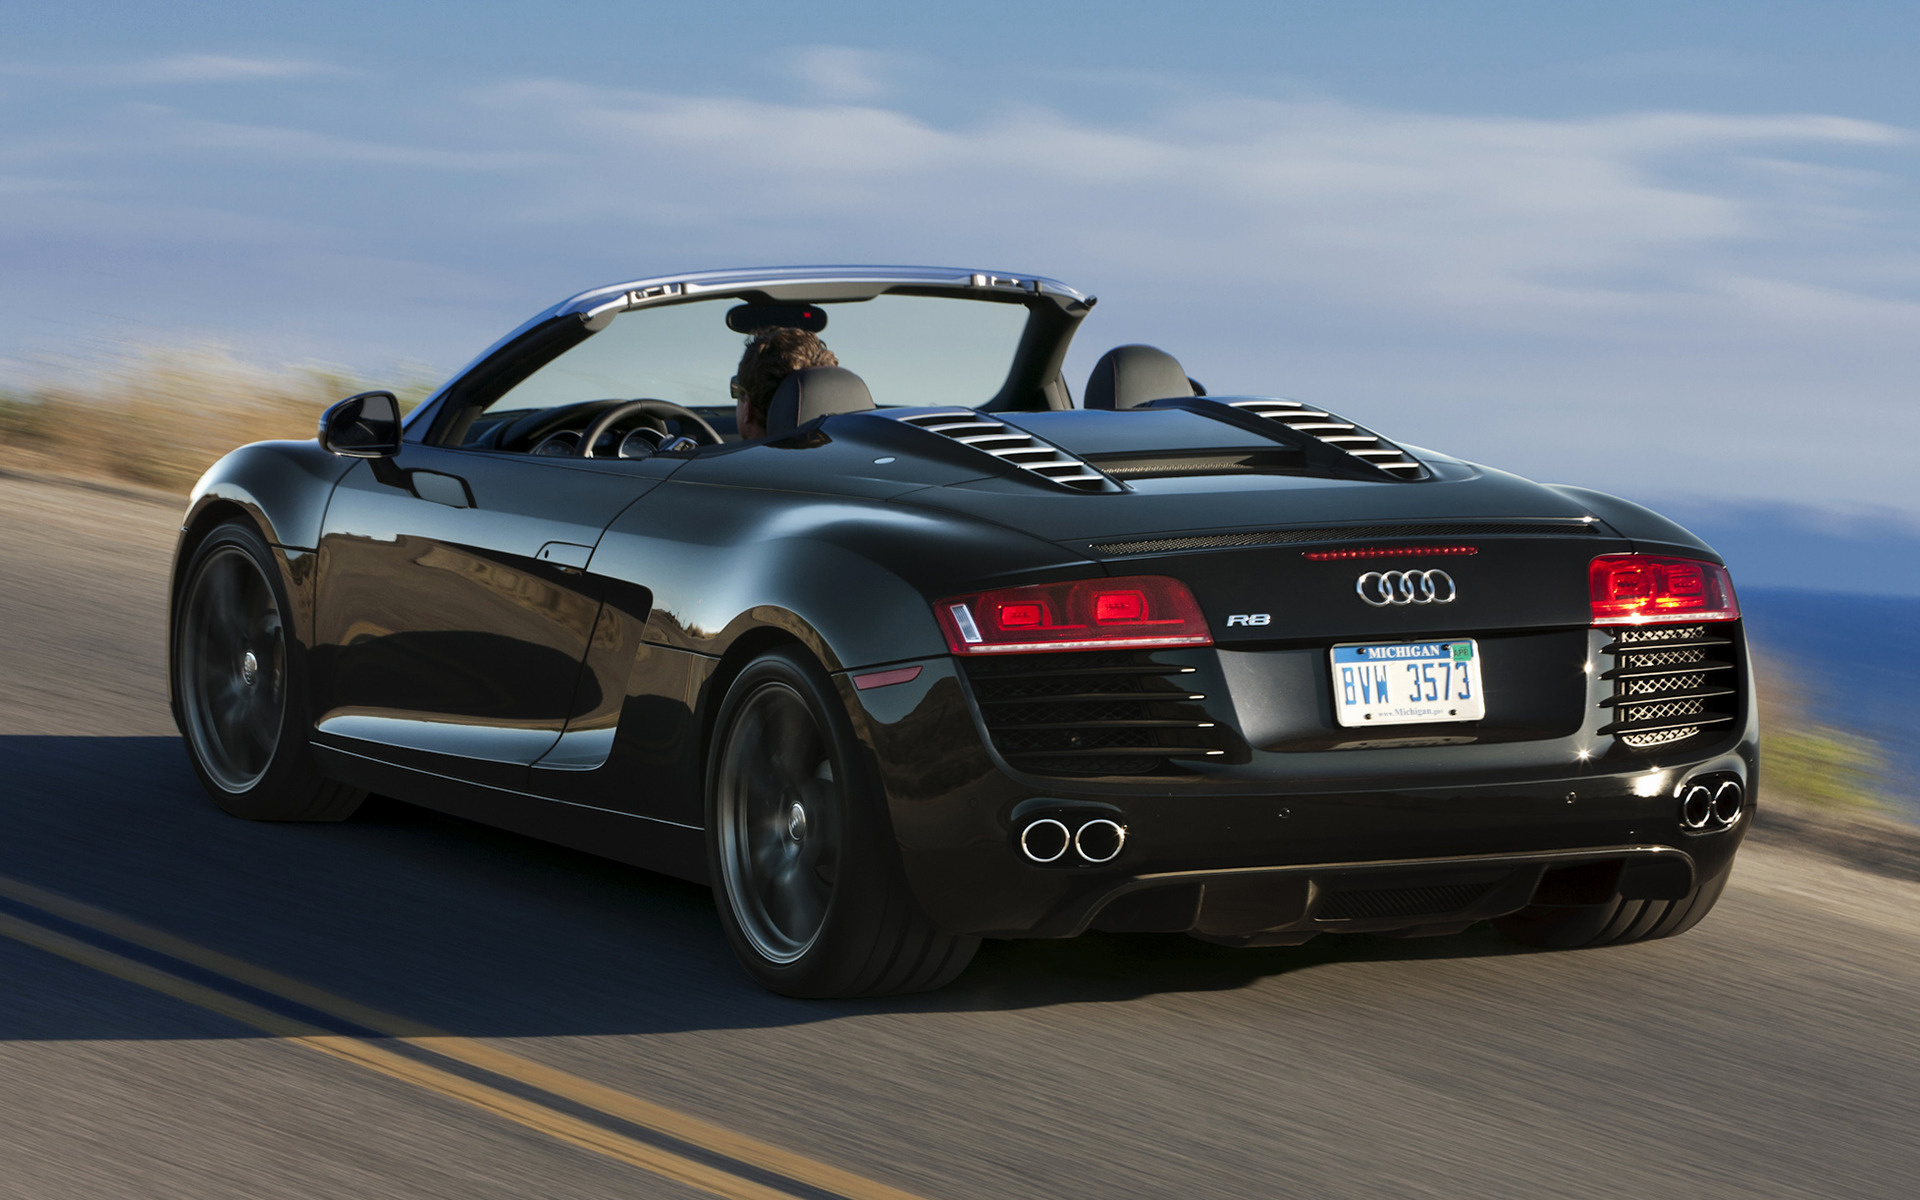 Audi R8 Spyder 2010 US Wallpapers and HD Images   Car Pixel 1920x1200